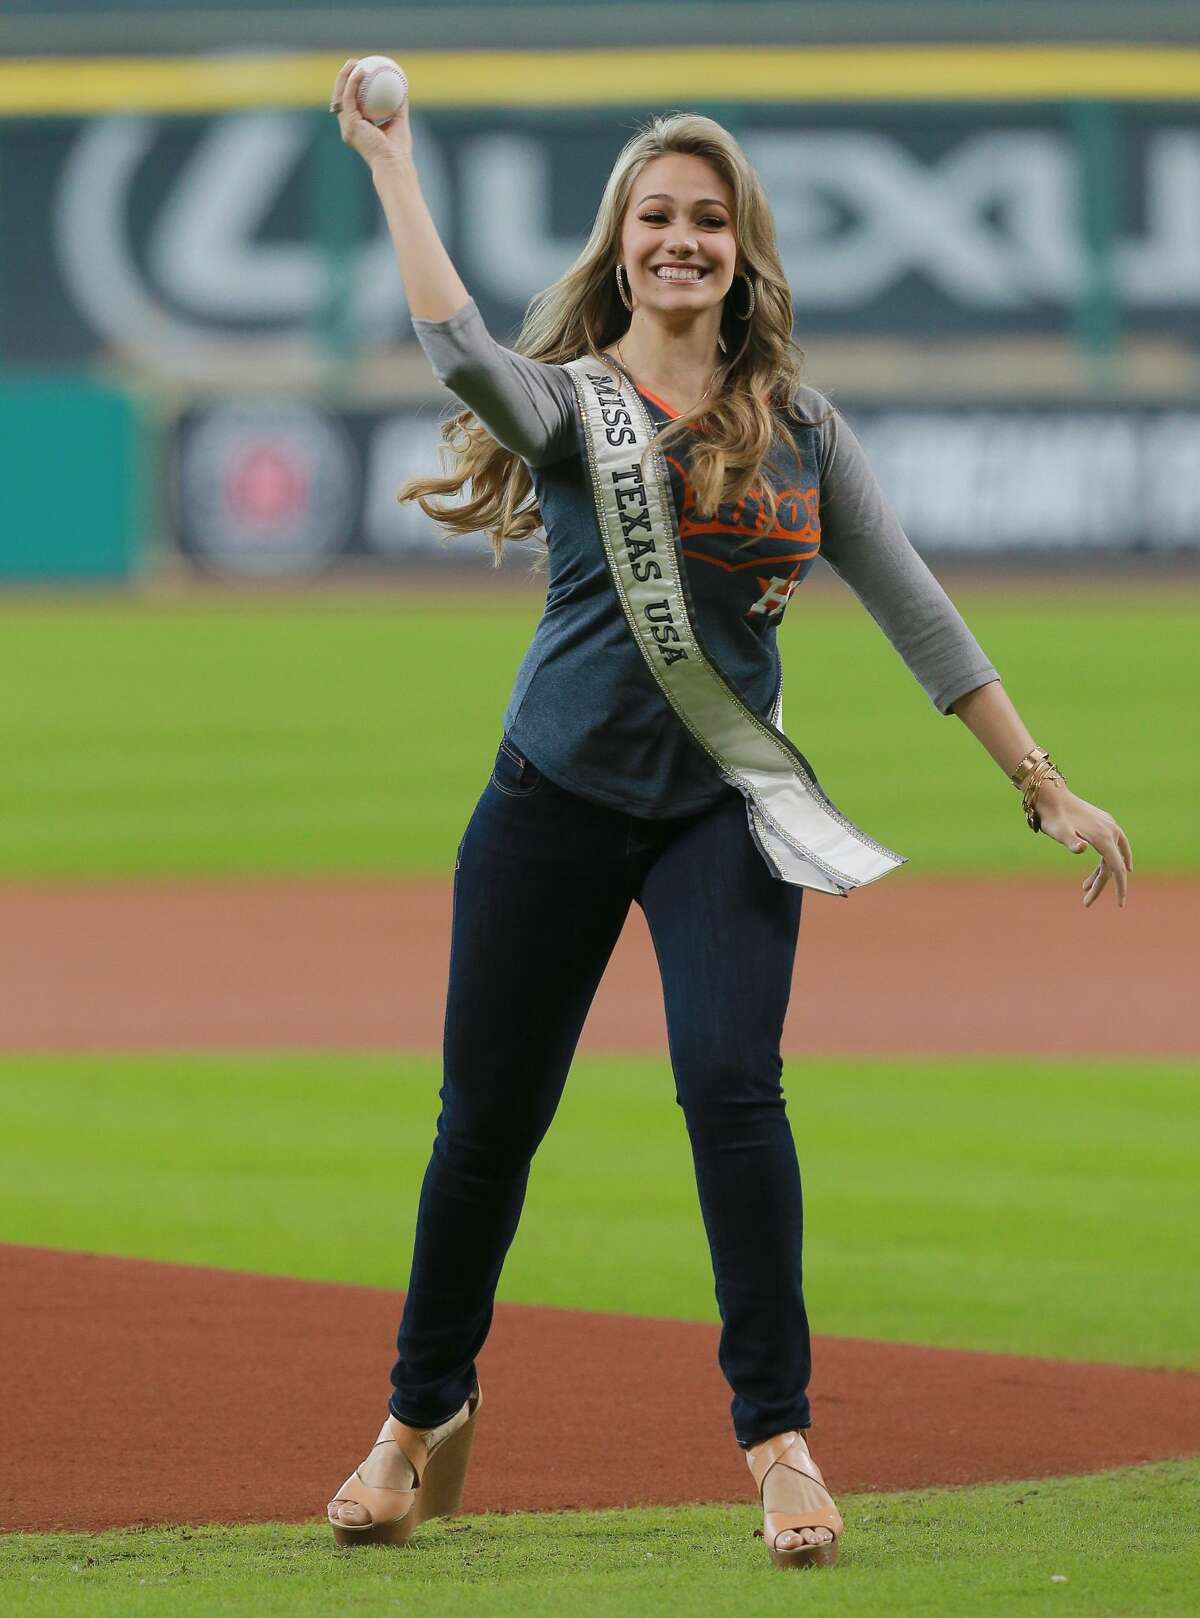 Miss Texas 2016 Daniella Rodriguez throws out ceremonial firtst pitch at Minute Maid Park on August 31, 2016 in Houston, Texas. Click through to see a few more photos of Miss Texas....